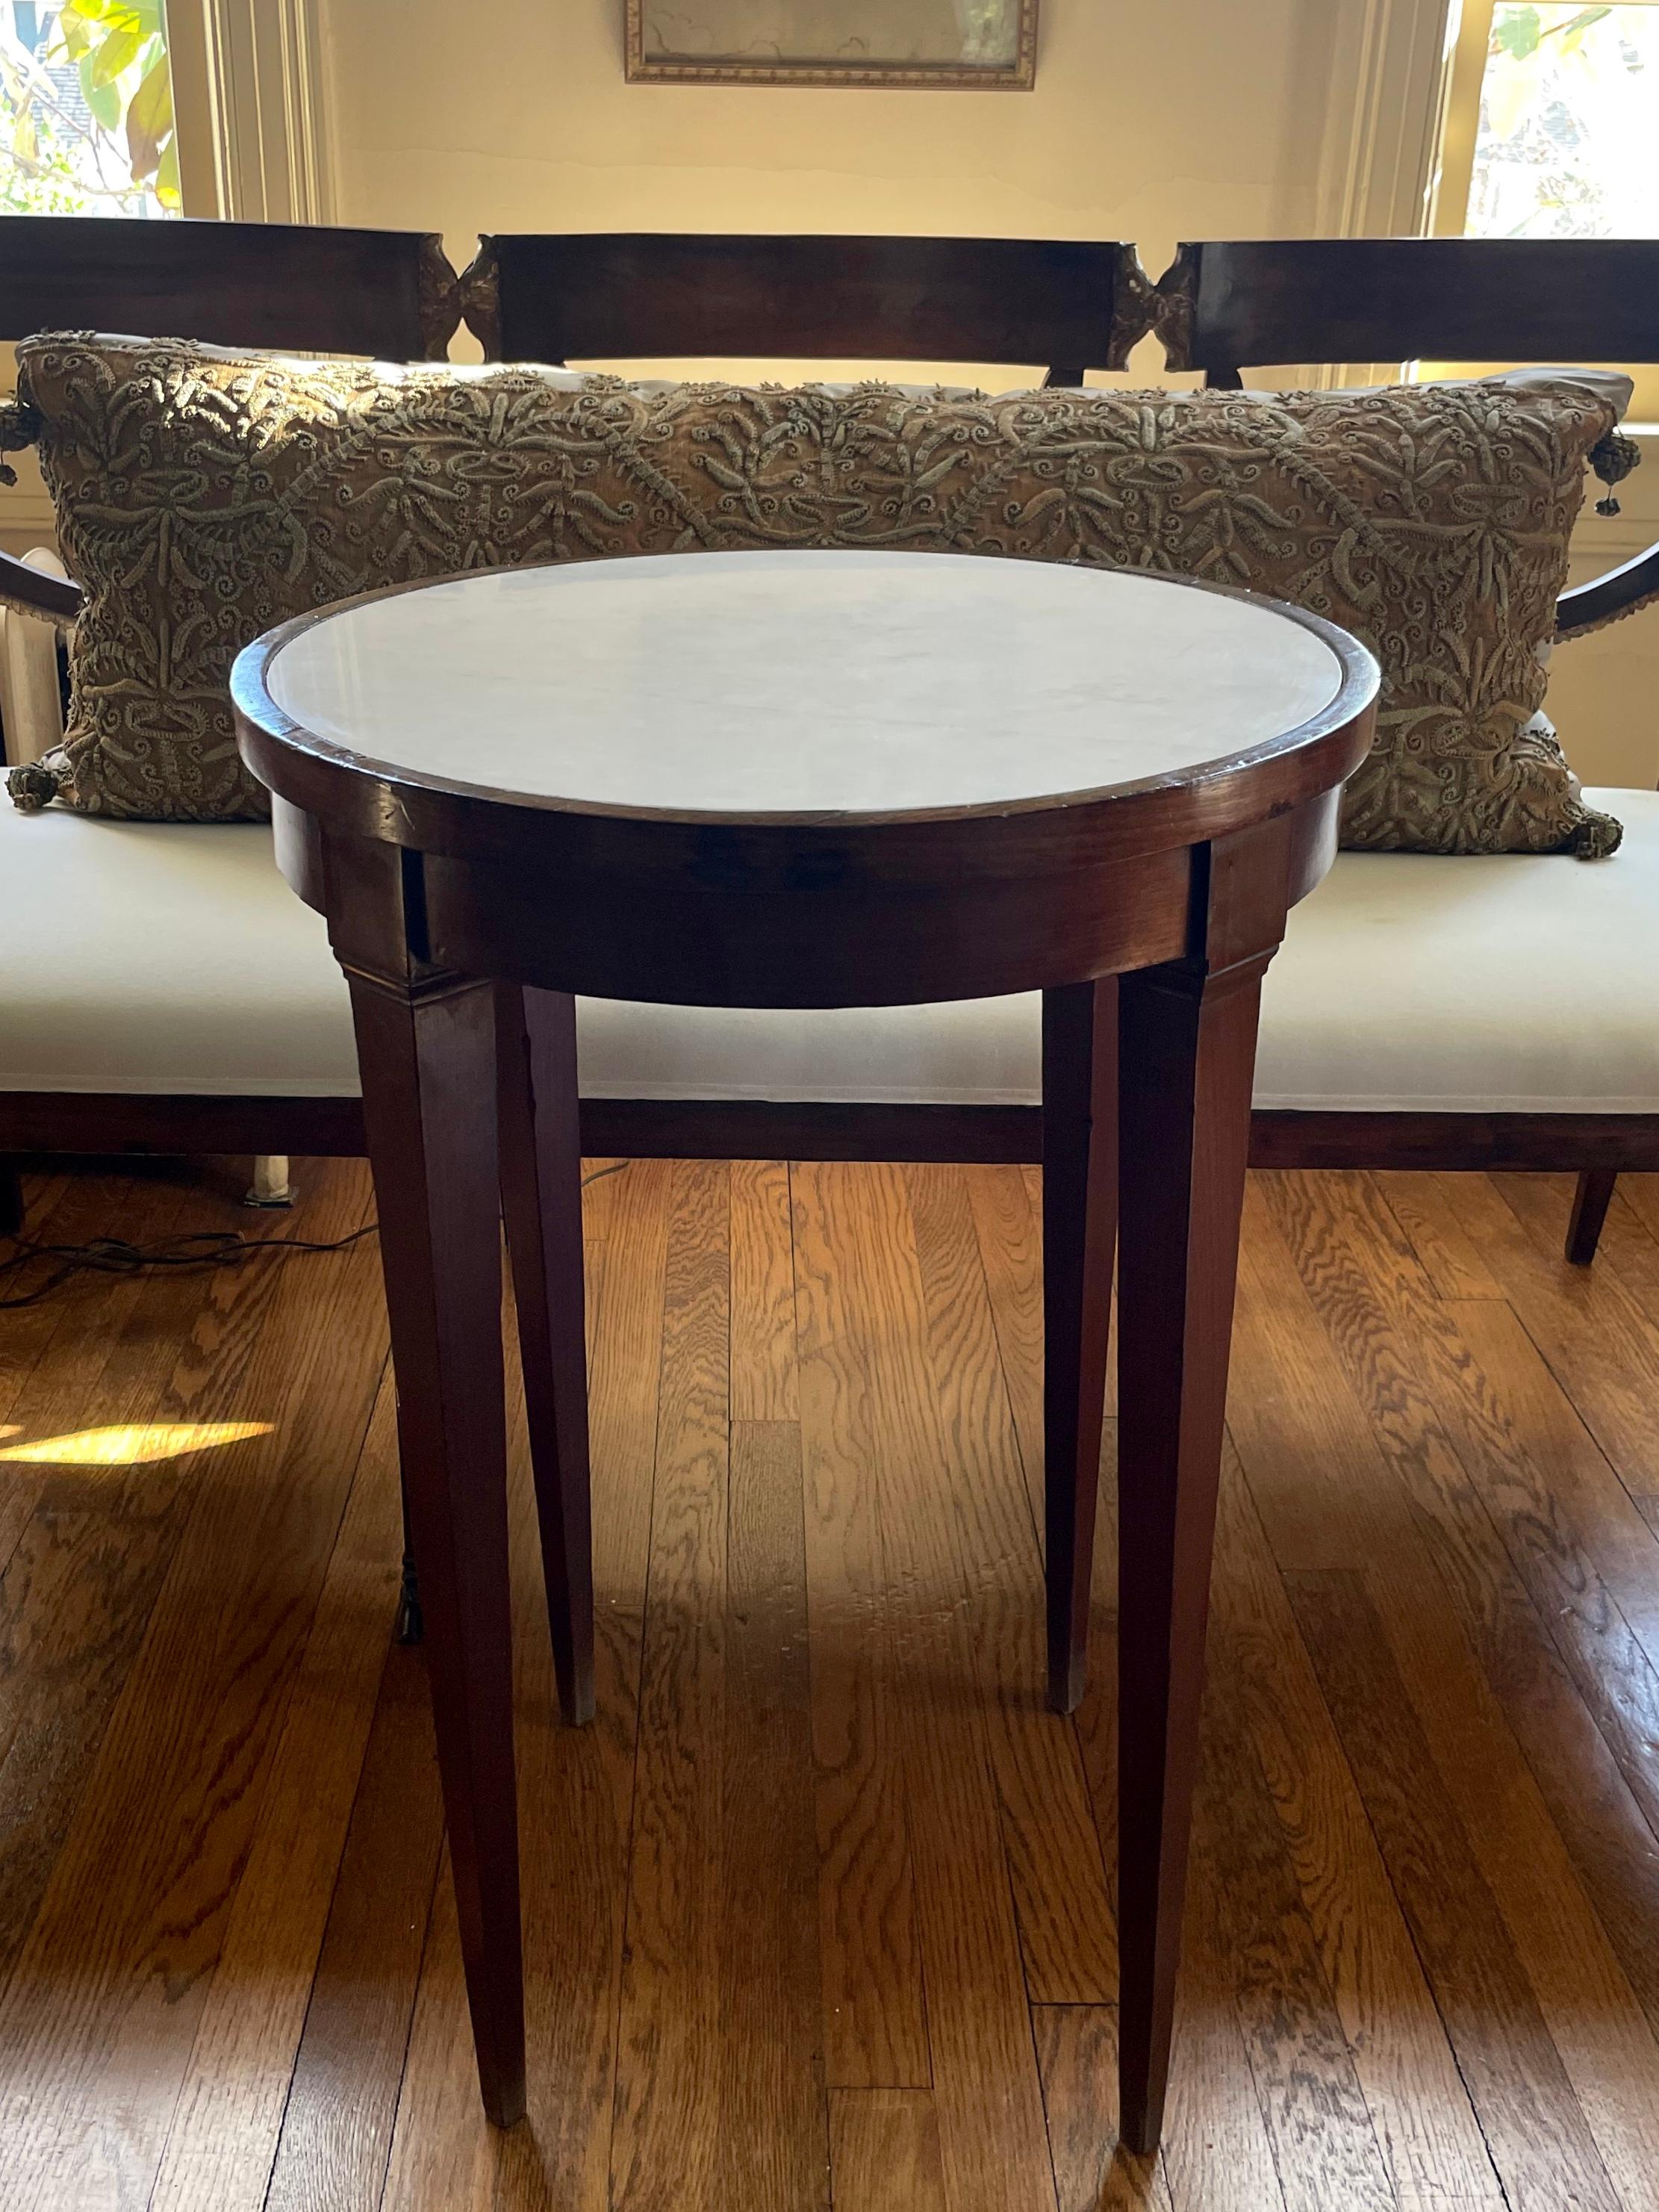 Italian Louis XVI white marble top table. Handsome and classic pared down Louis XVI cherrywood circular table with white inset marble top; elegant in traditional or modern settings due to its severely classic lines. Long streak in top is not a crack